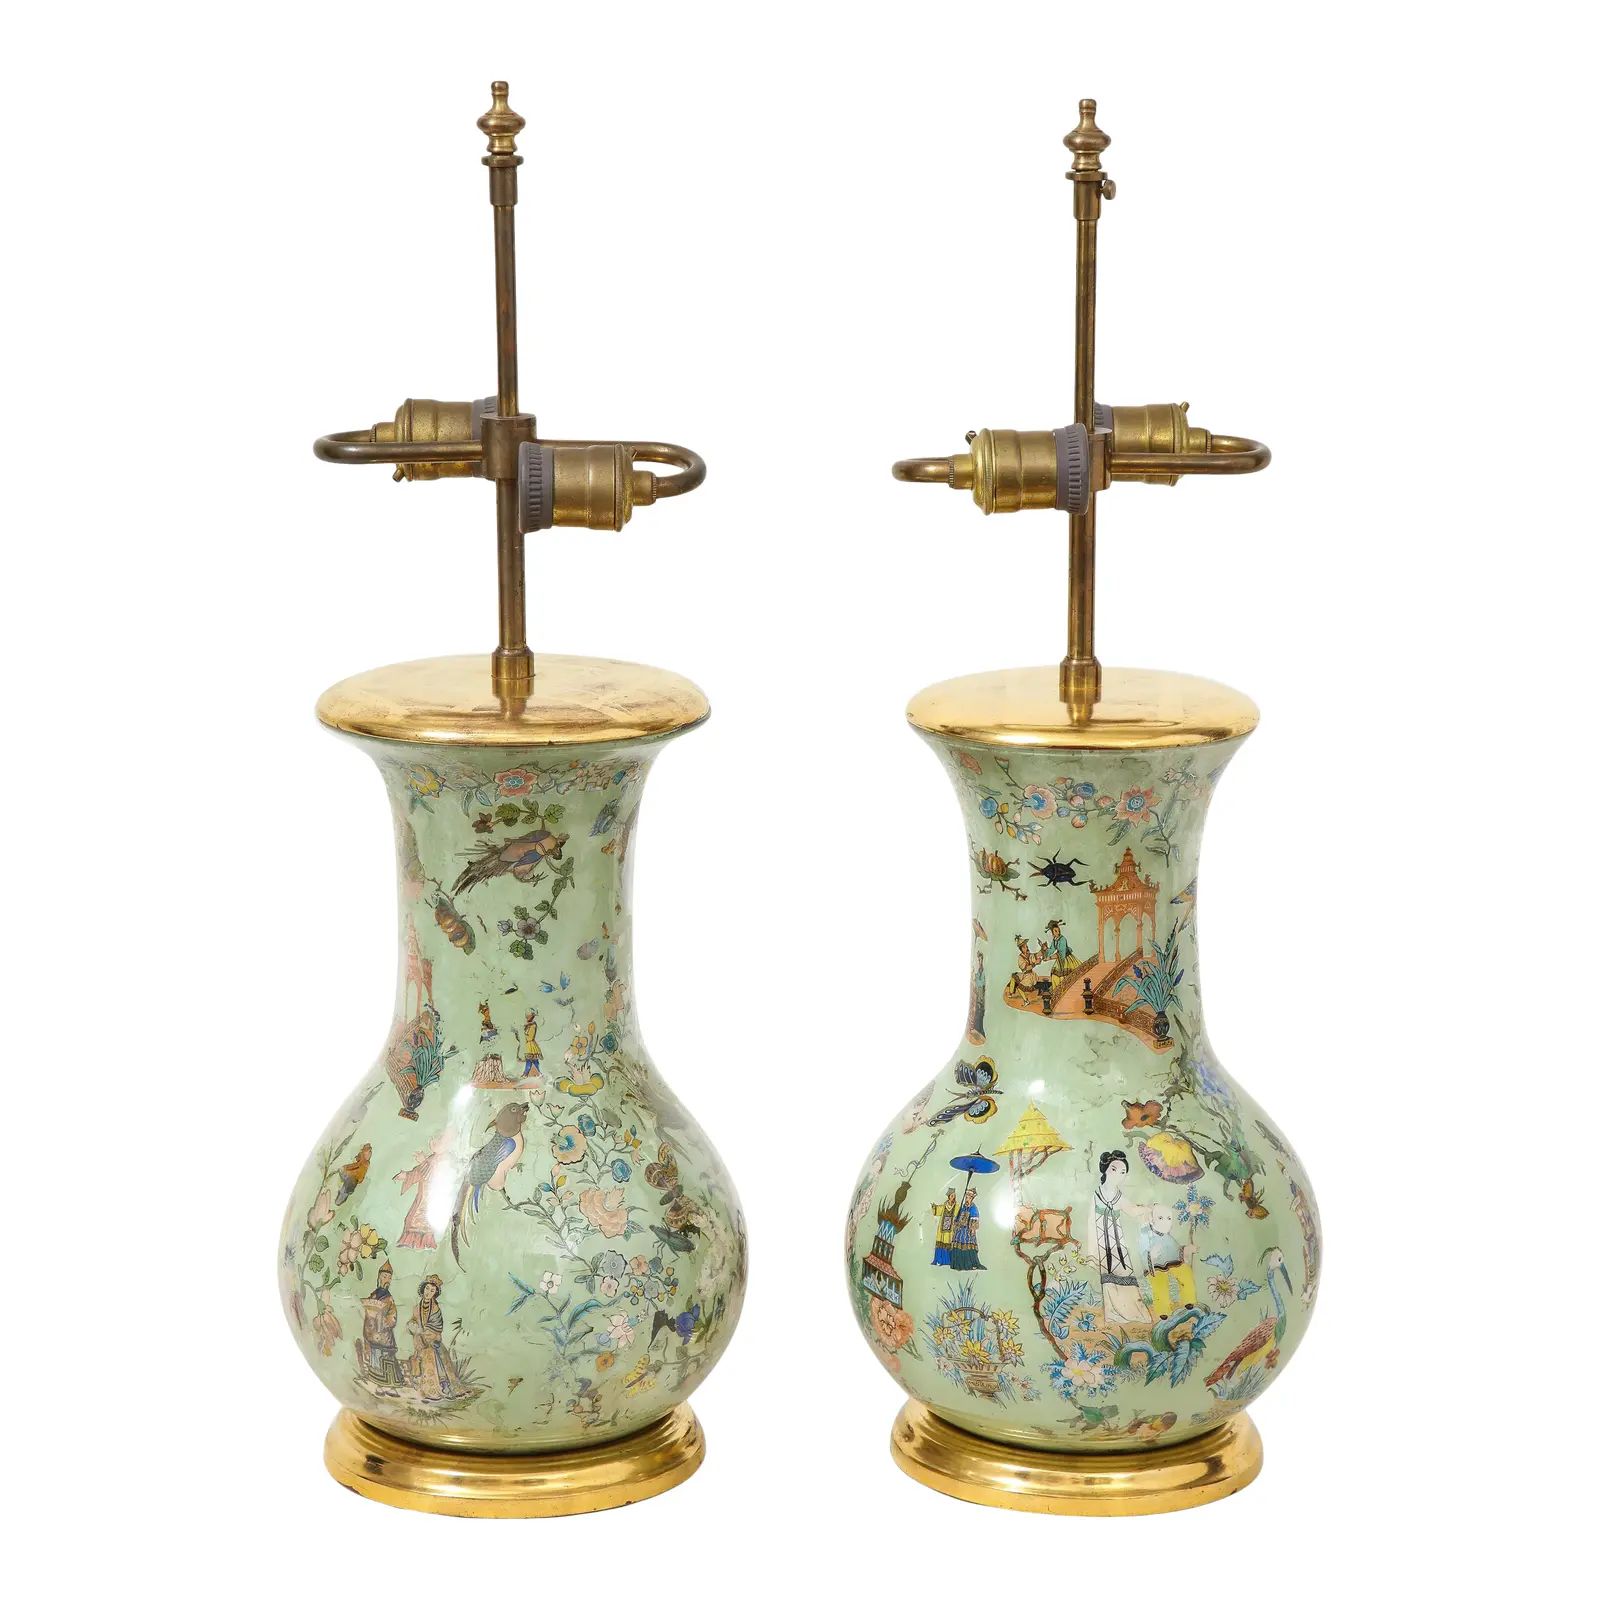 19th Century Green Decalcomania Vases Mounted as Lamps - a Pair | Chairish